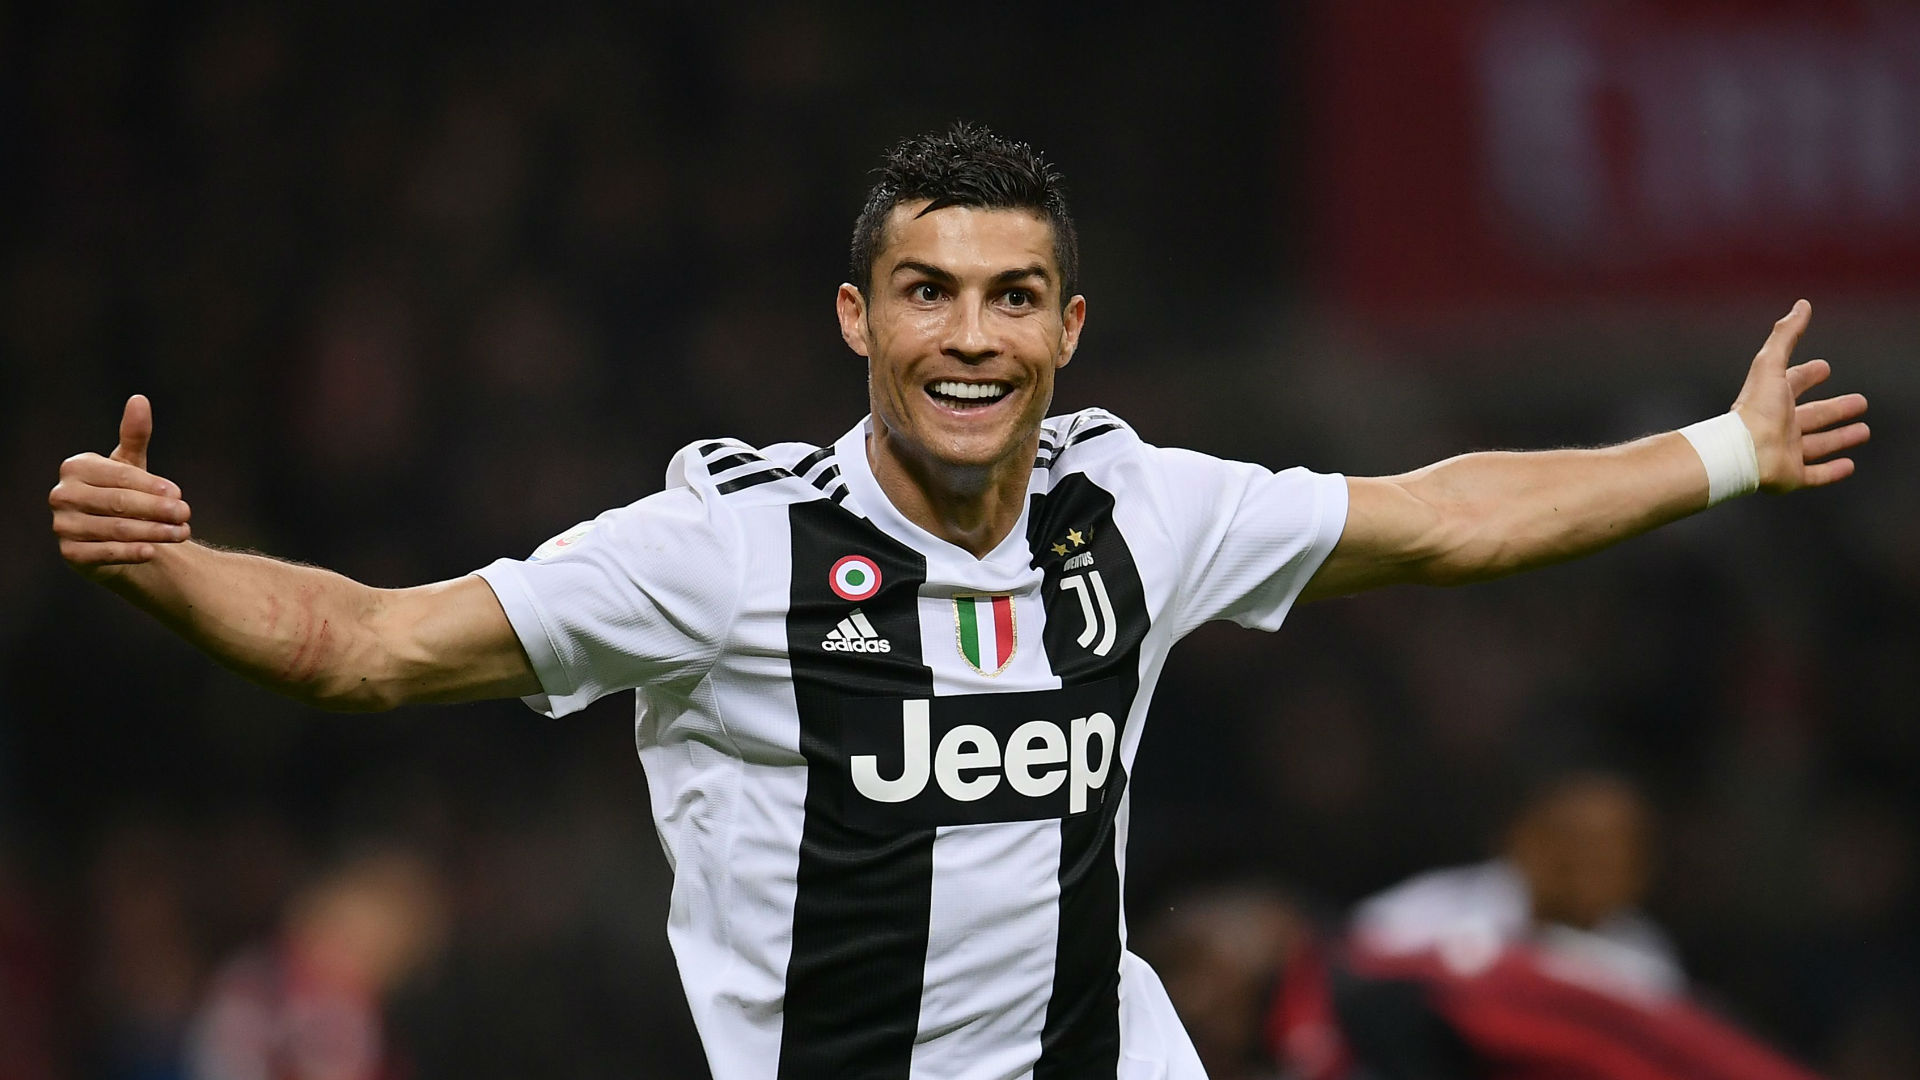 Cristiano Ronaldo fans react to Juventus hat-trick - ‘King of the Champions League’ - Bóng Đá